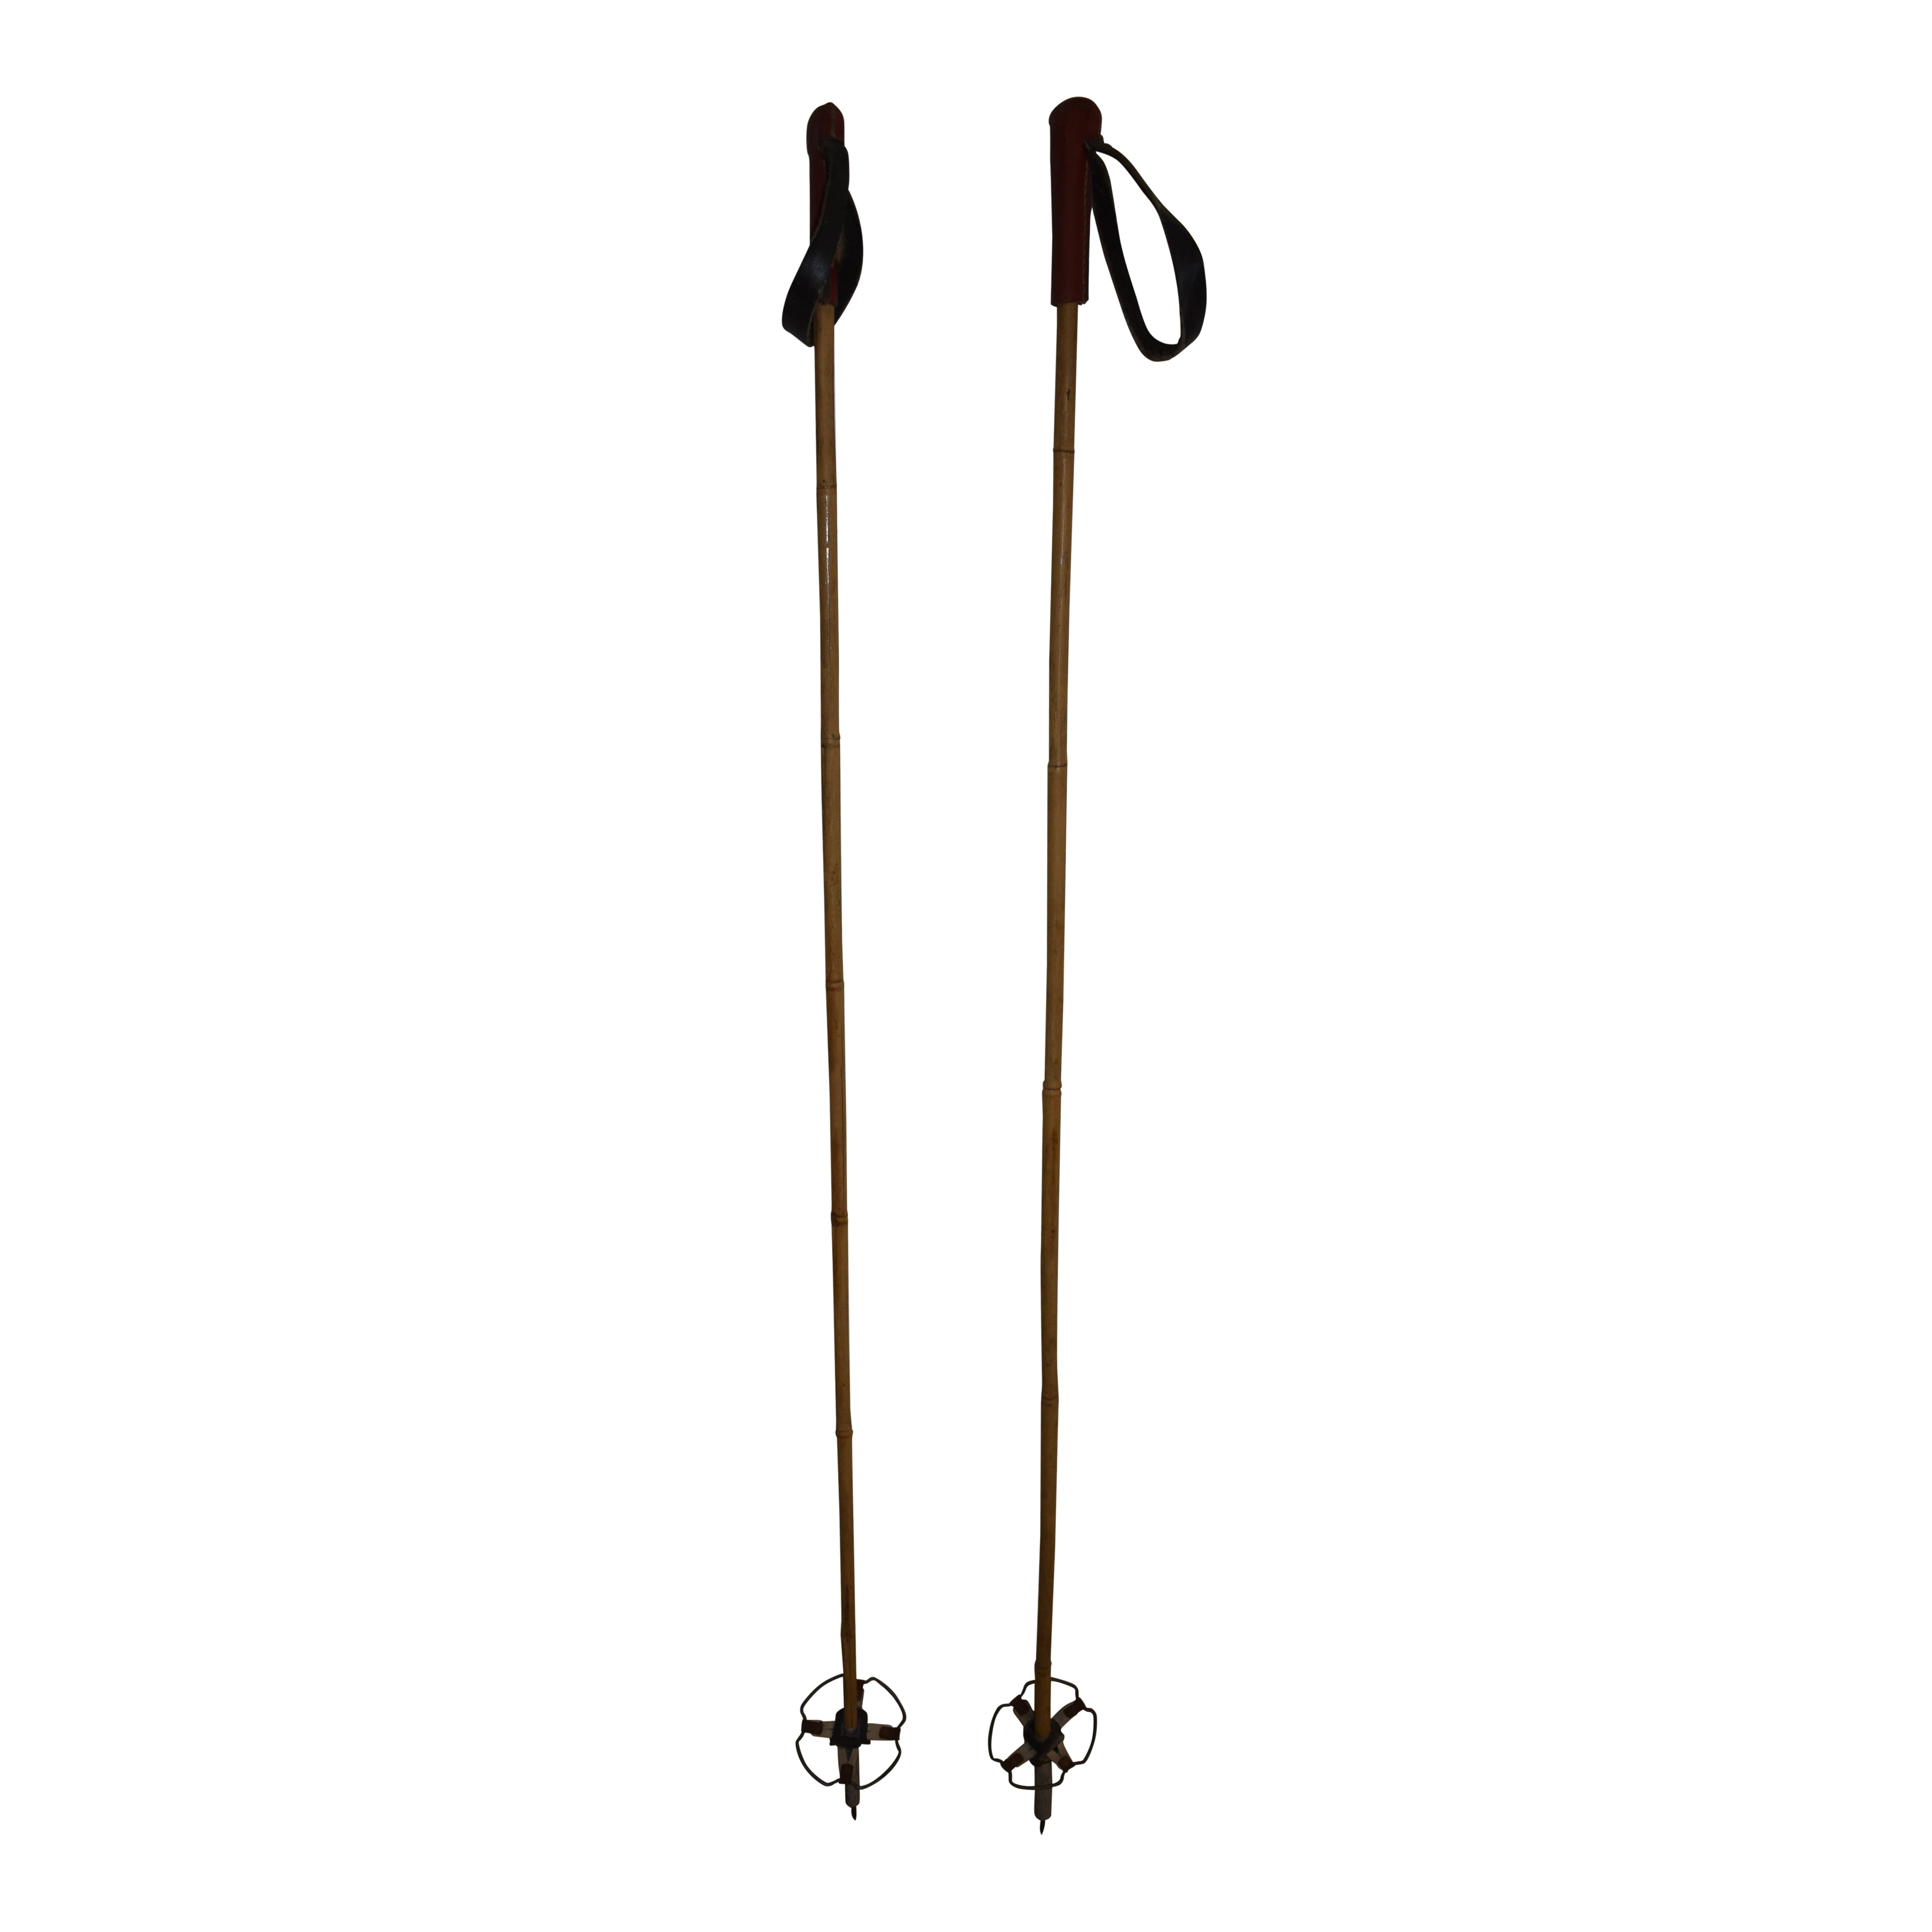 Long Bamboo Ski Poles with Leather Grips and Aluminum Baskets